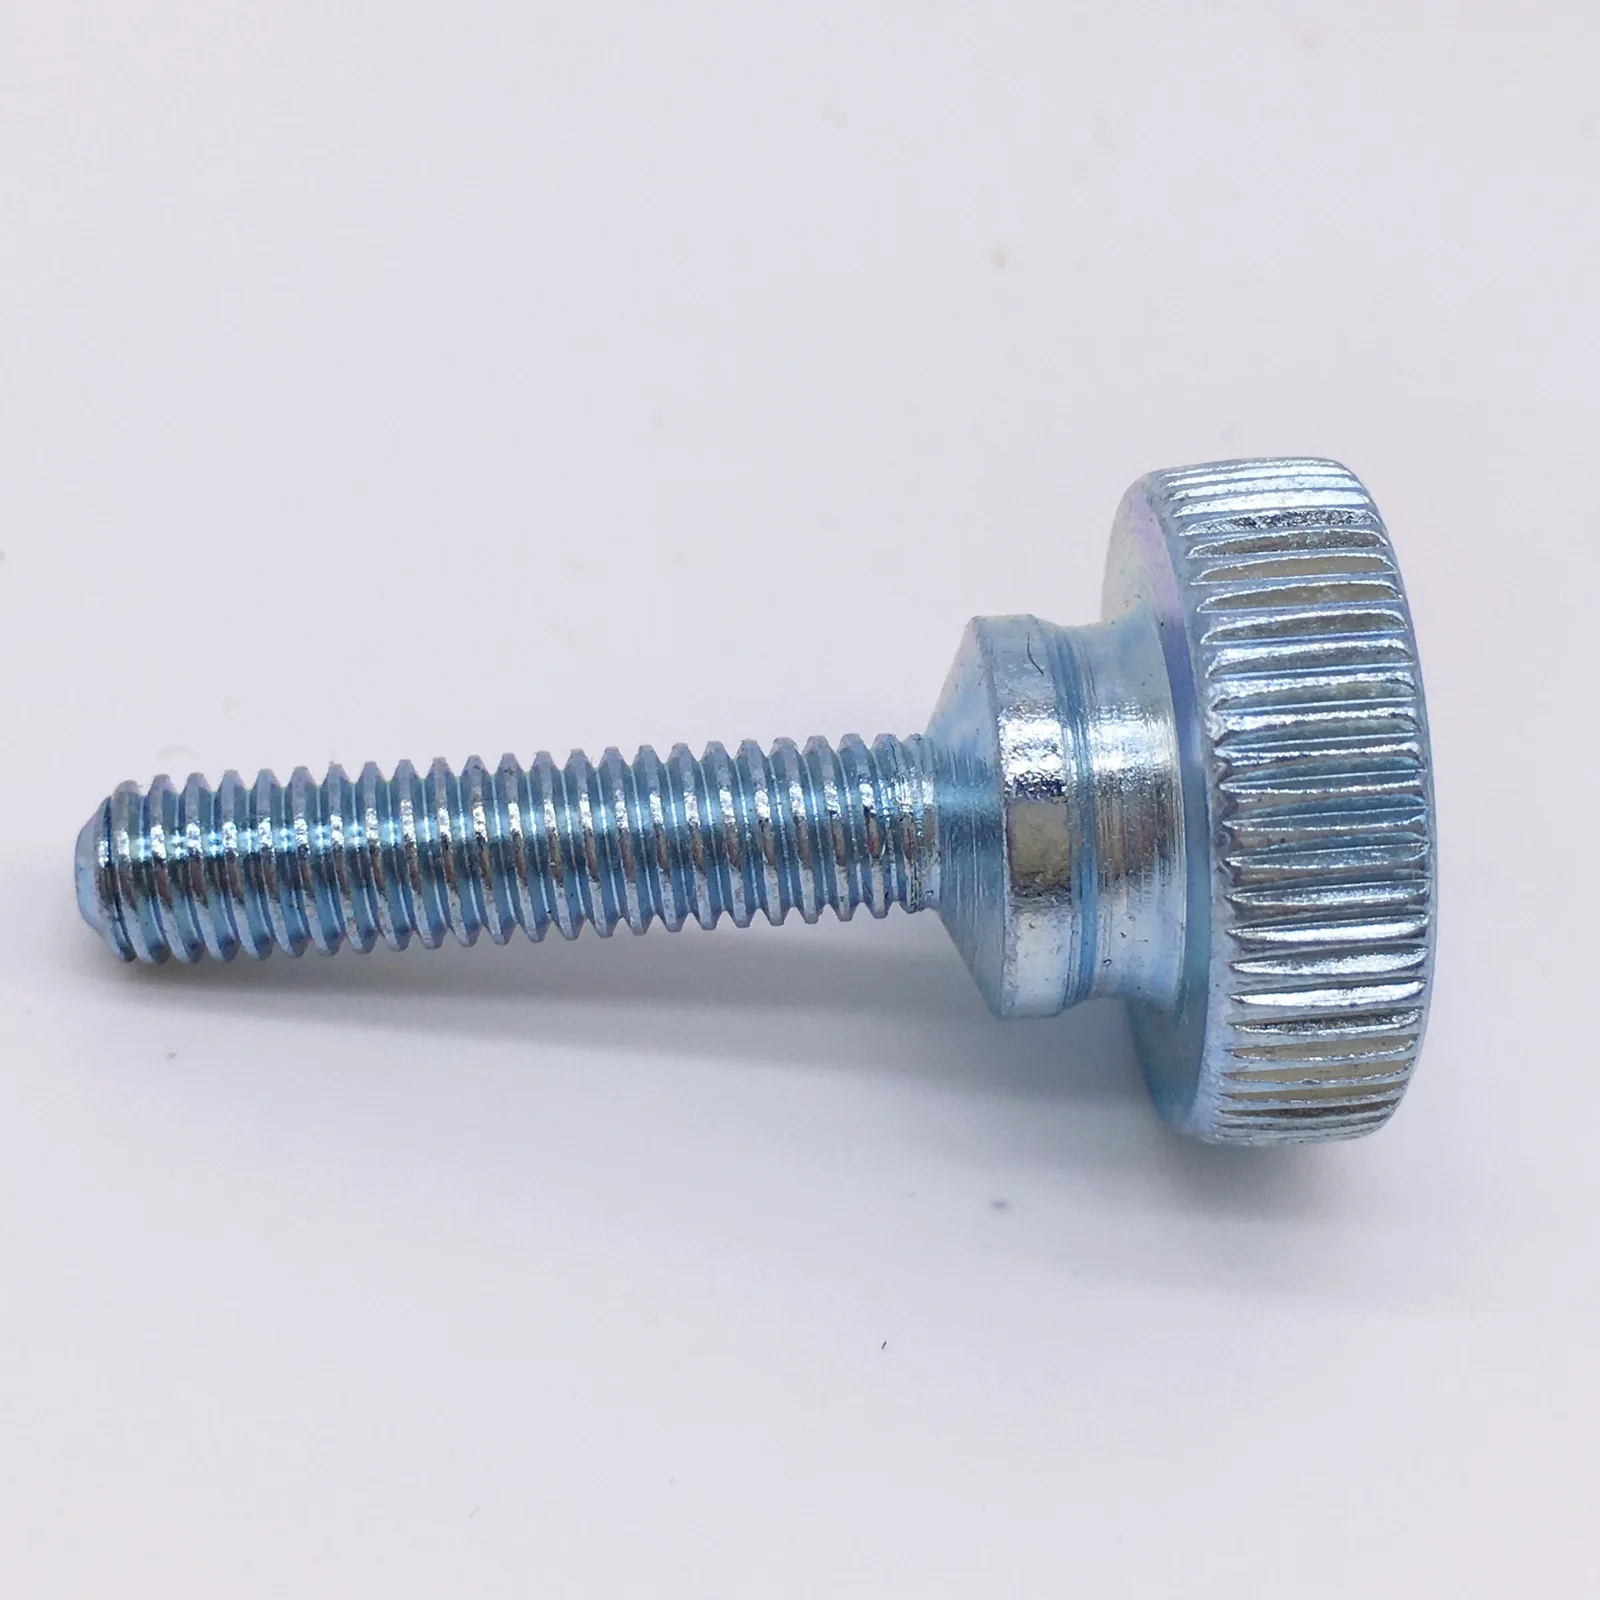 

M6x10 Thumb Screws Knurled Head With Should Bolts Metric Zinc Plated Pack 20